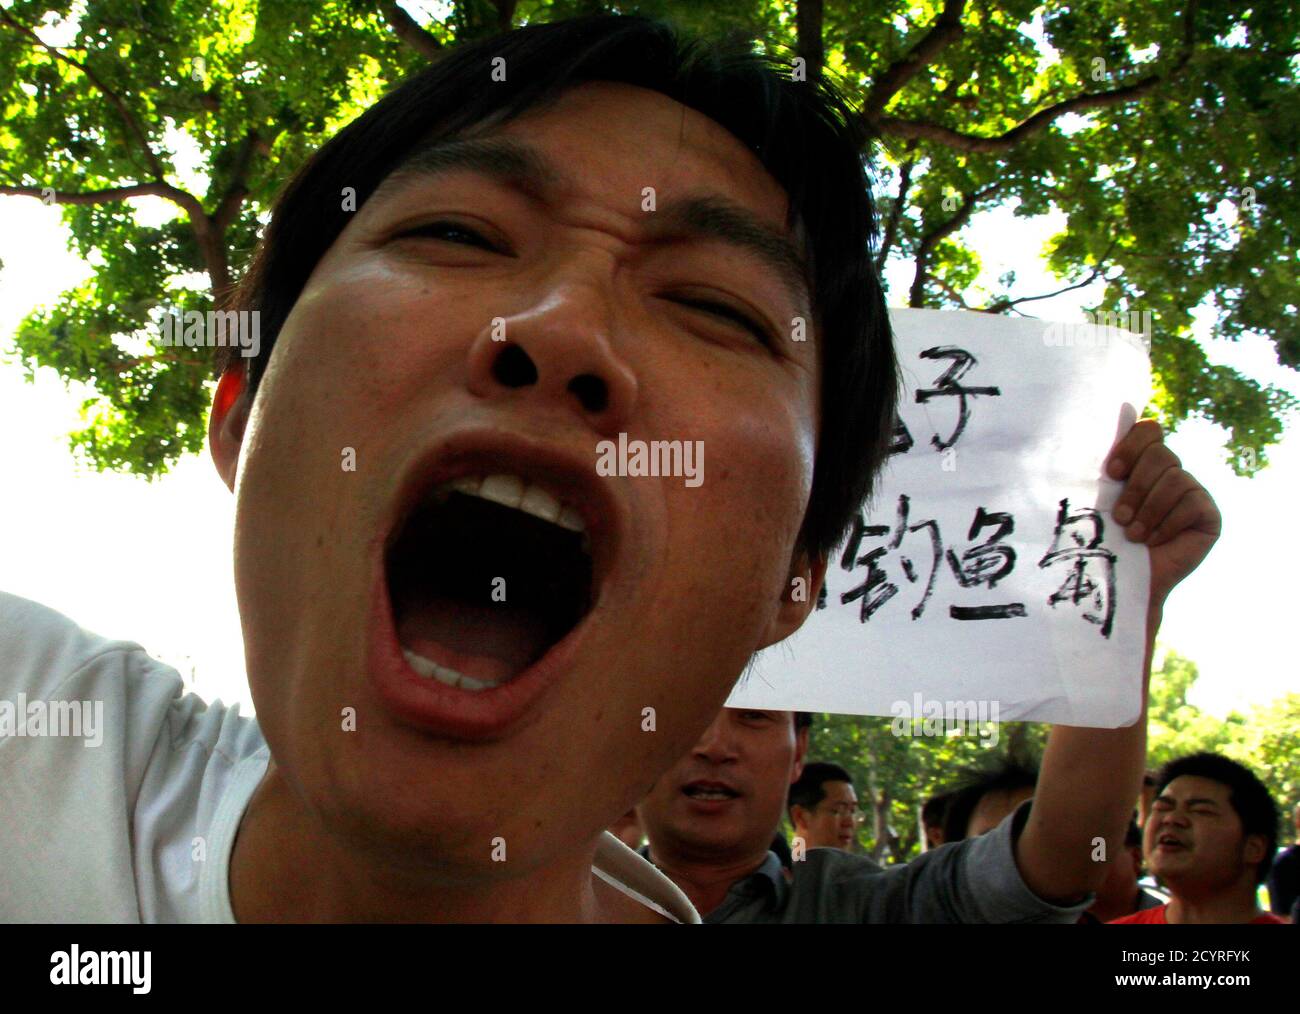 Demonstrators yell slogans and hold banners as they protest outside the Japanese embassy in Beijing September 12, 2012. The United States cautioned China and Japan against escalating a row over a group of islands that both nations claim, warning that tensions between the world's second and third-biggest economies would have global repercussions. On Tuesday, Japan brushed off stern warnings by China and said it had bought the islands from a private Japanese owner. China rained warnings on Japan and official media said Beijing had sent two patrol ships to reassert its claim.   REUTERS/David Gray Stock Photo